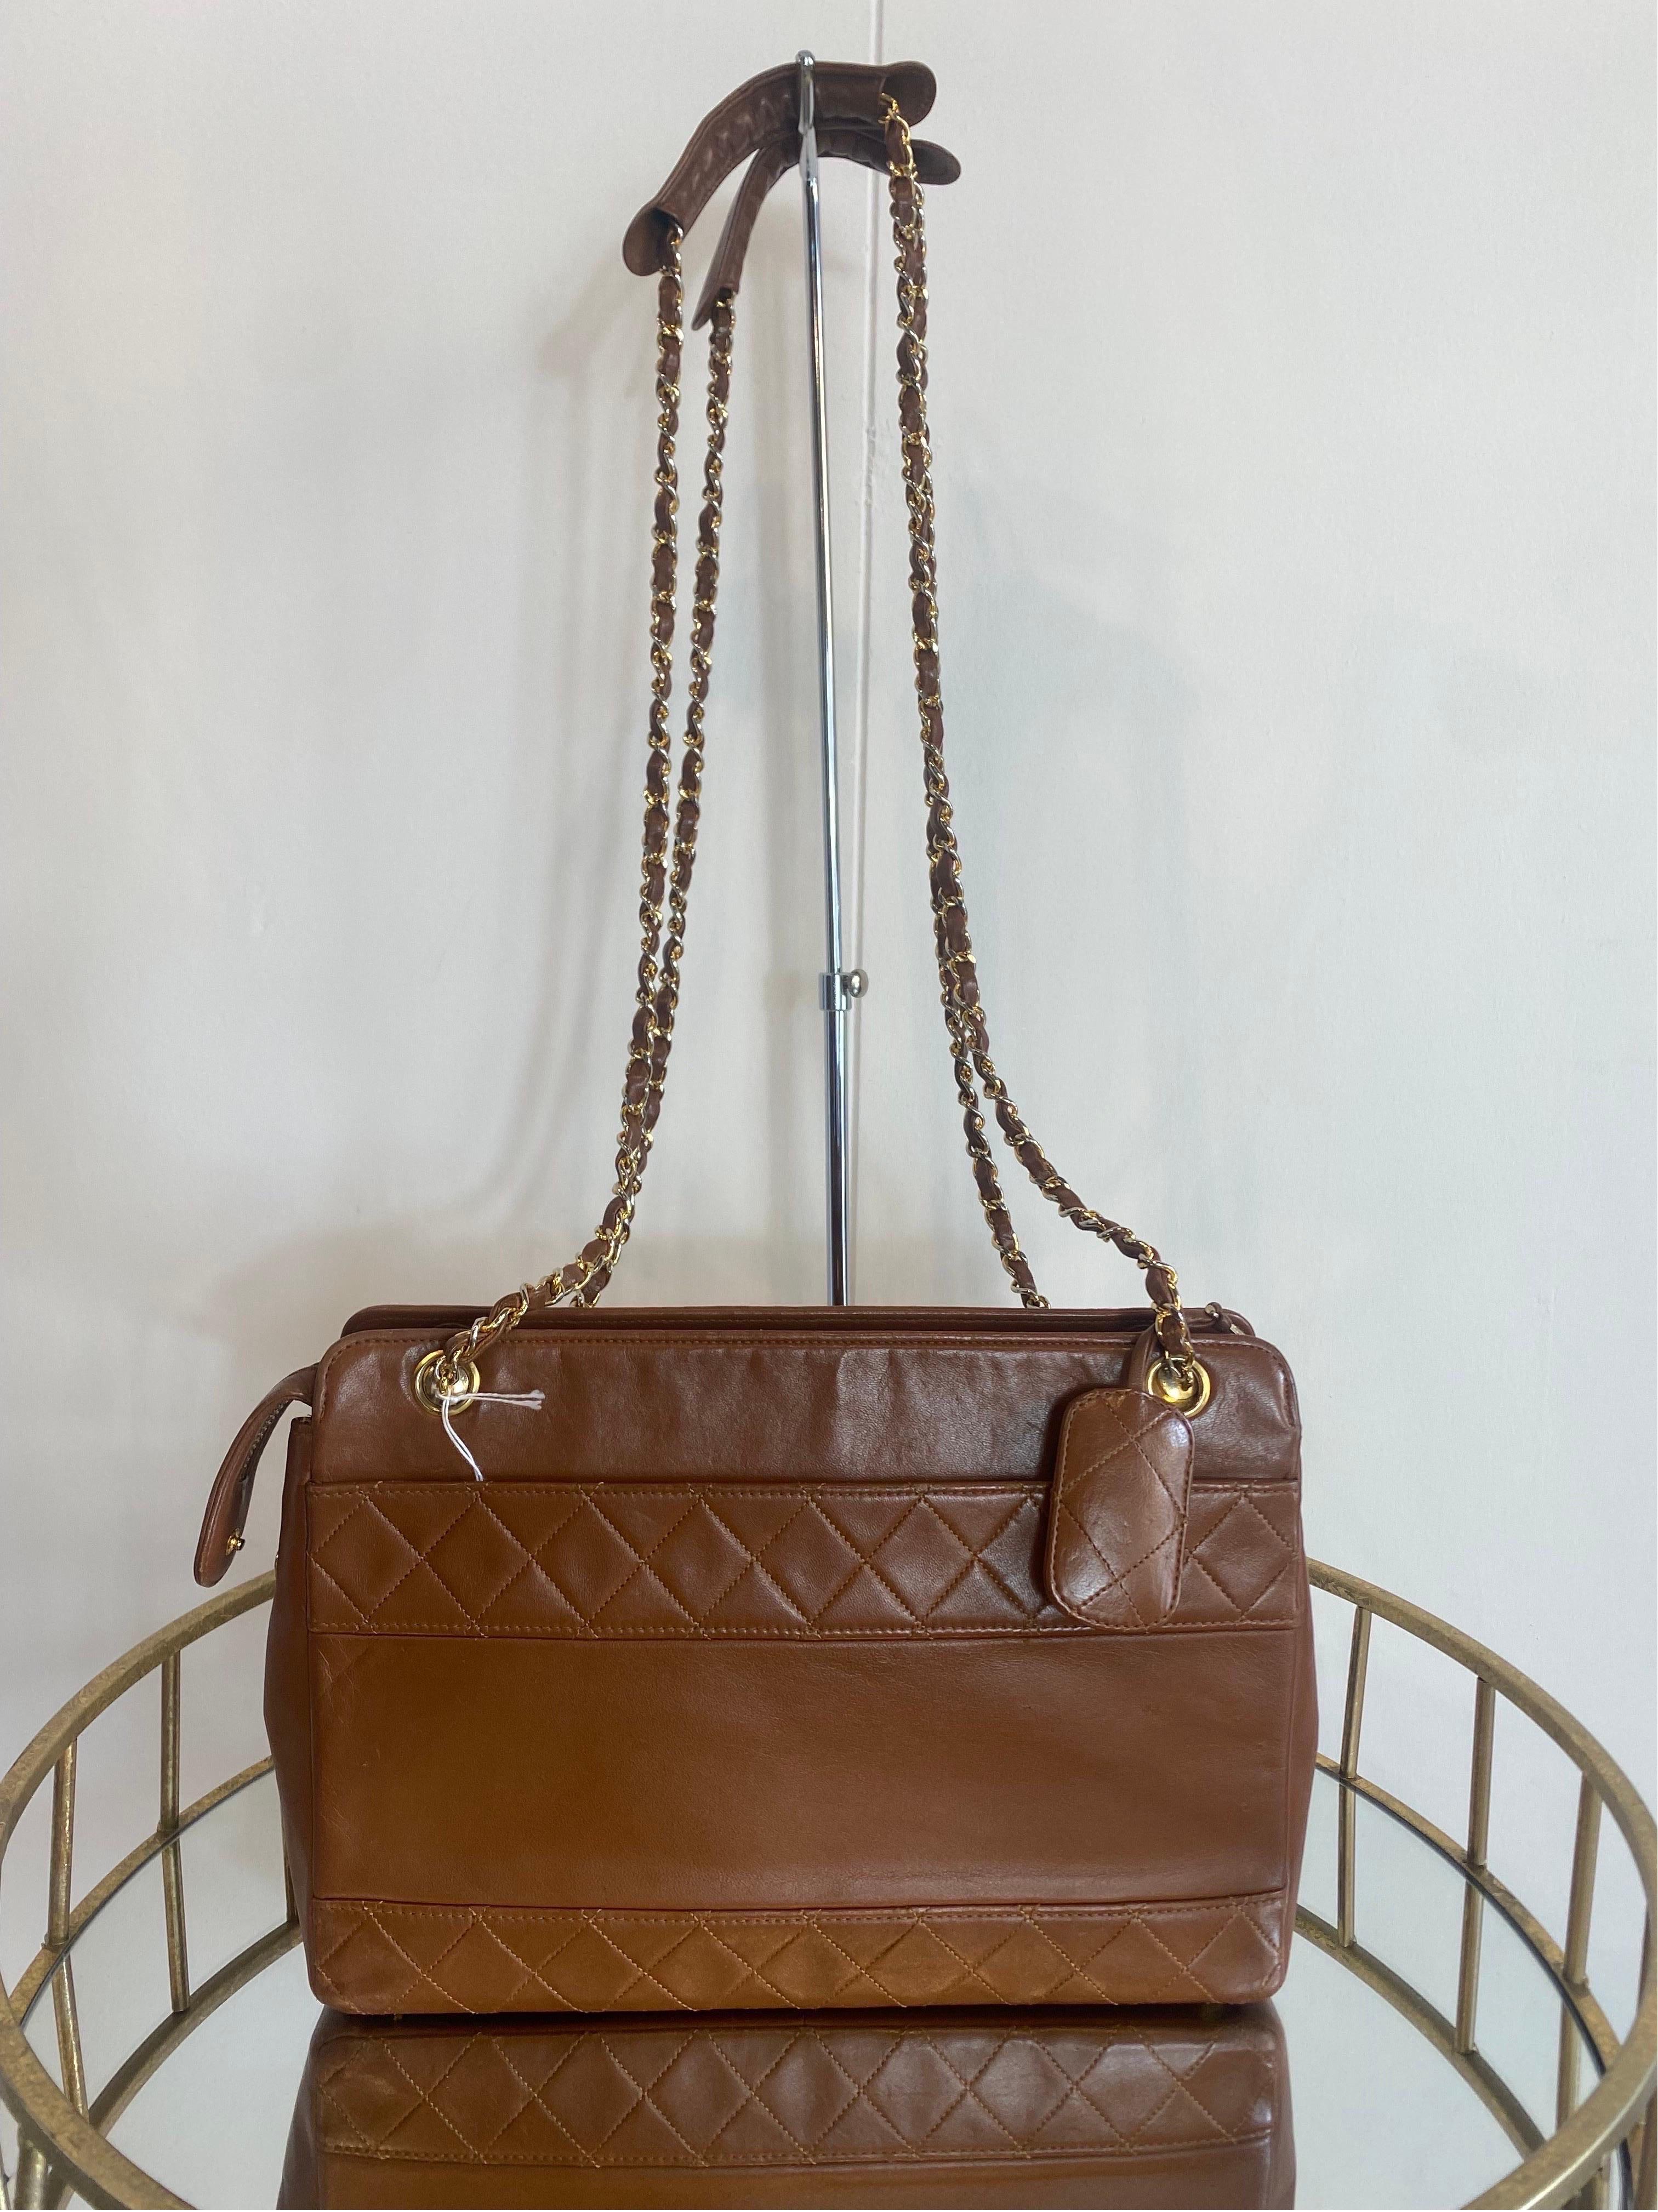 80s caramel Chanel bag
Vintage caramel-colored leather bag worn over the shoulder.
Golden hardware.
3 general pockets
1 with zip which contains 1 other zipped pocket and 2 other spaces pockets.
If you want, you can also use just the purse,